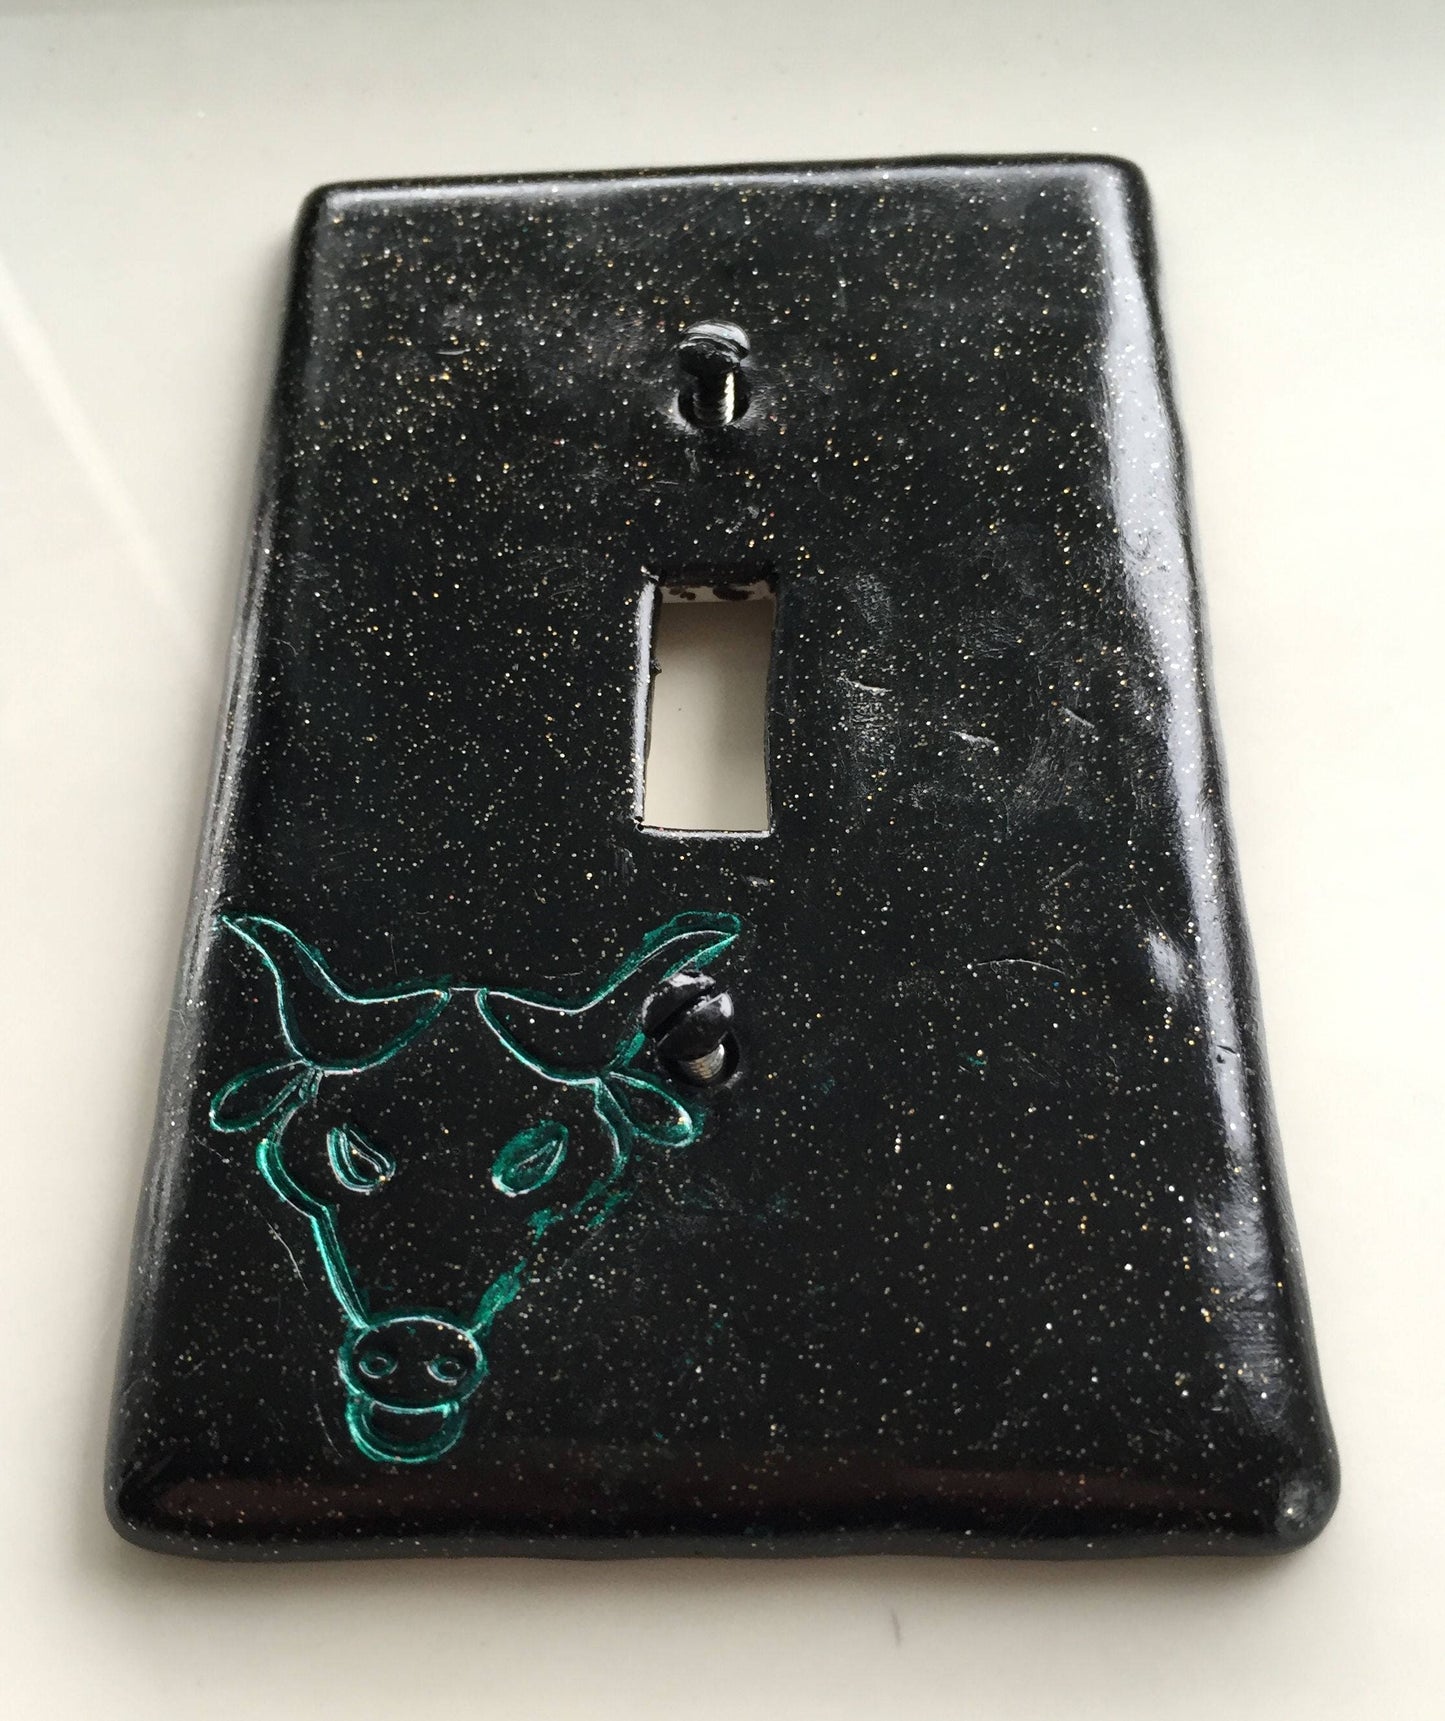 Taurus The Bull light switch plate cover for single toggle switch. black with glitter and metallic green bull CUSTOM COLORS AVAILABLE